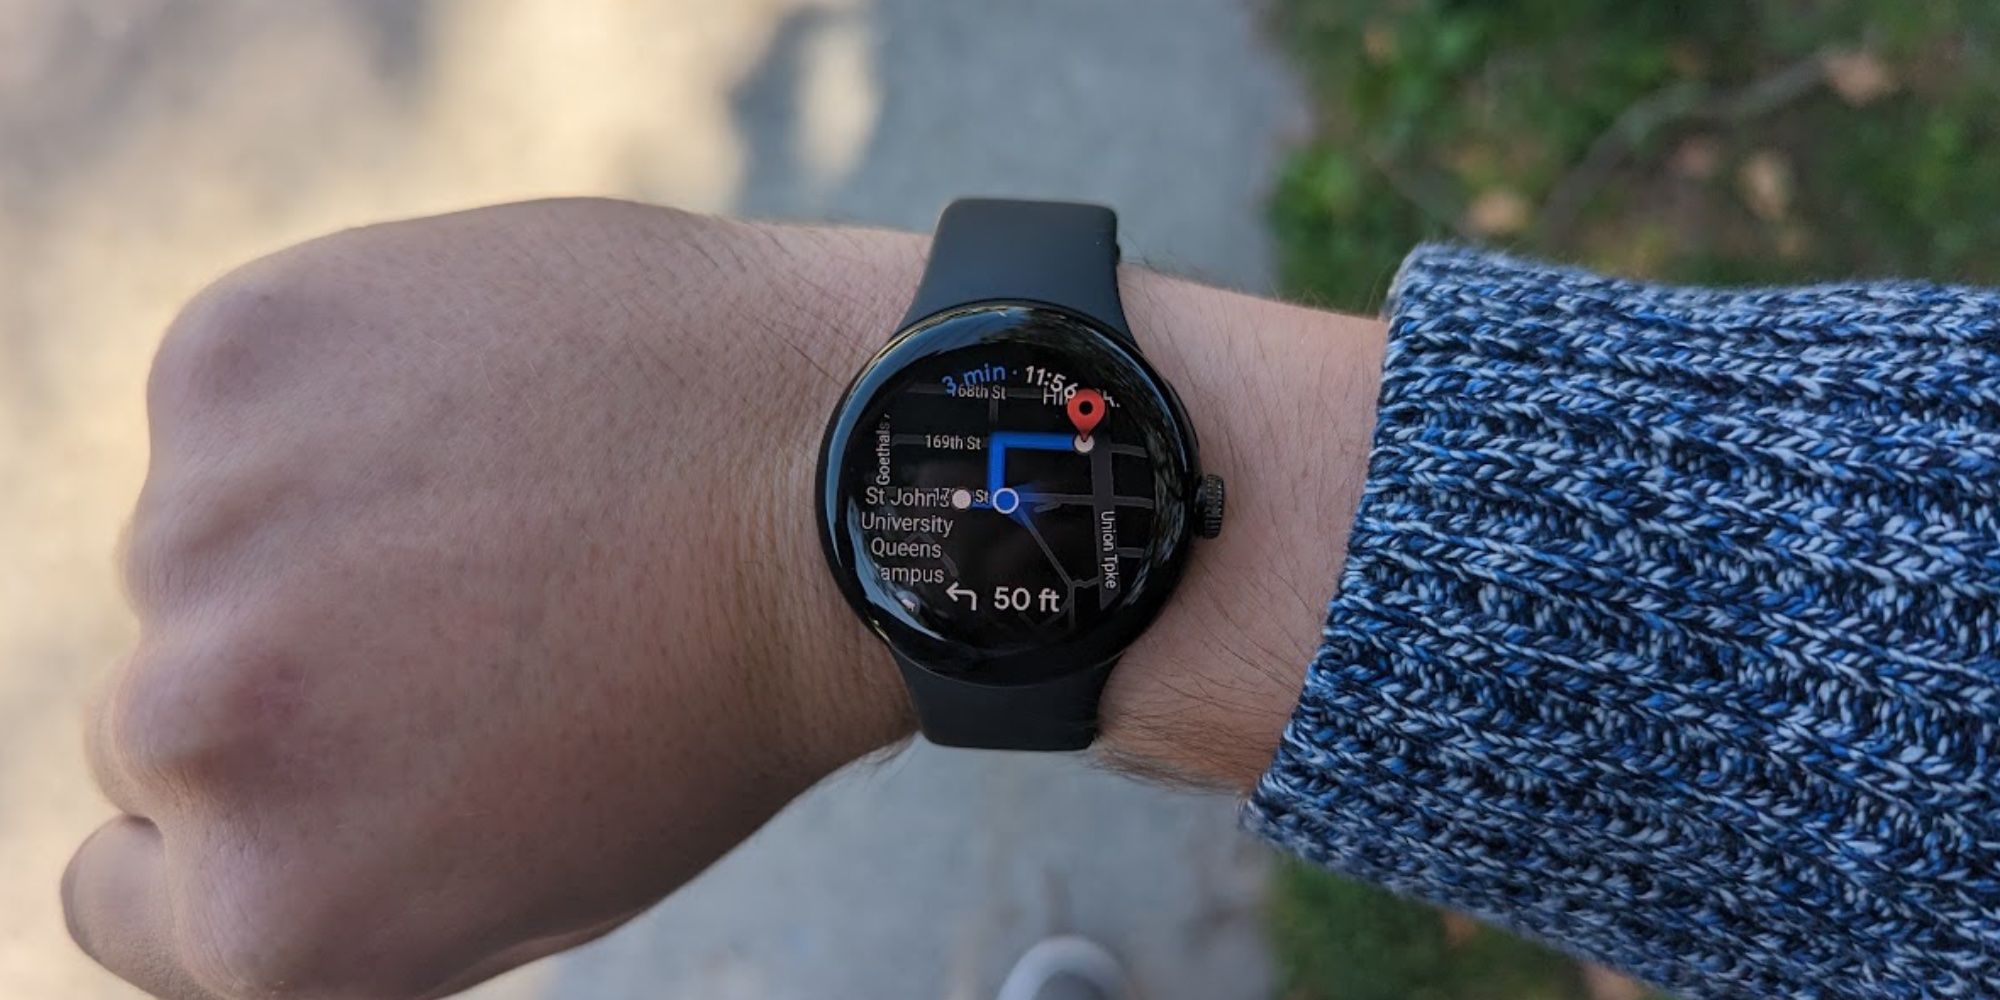 Google Maps on the Pixel Watch.